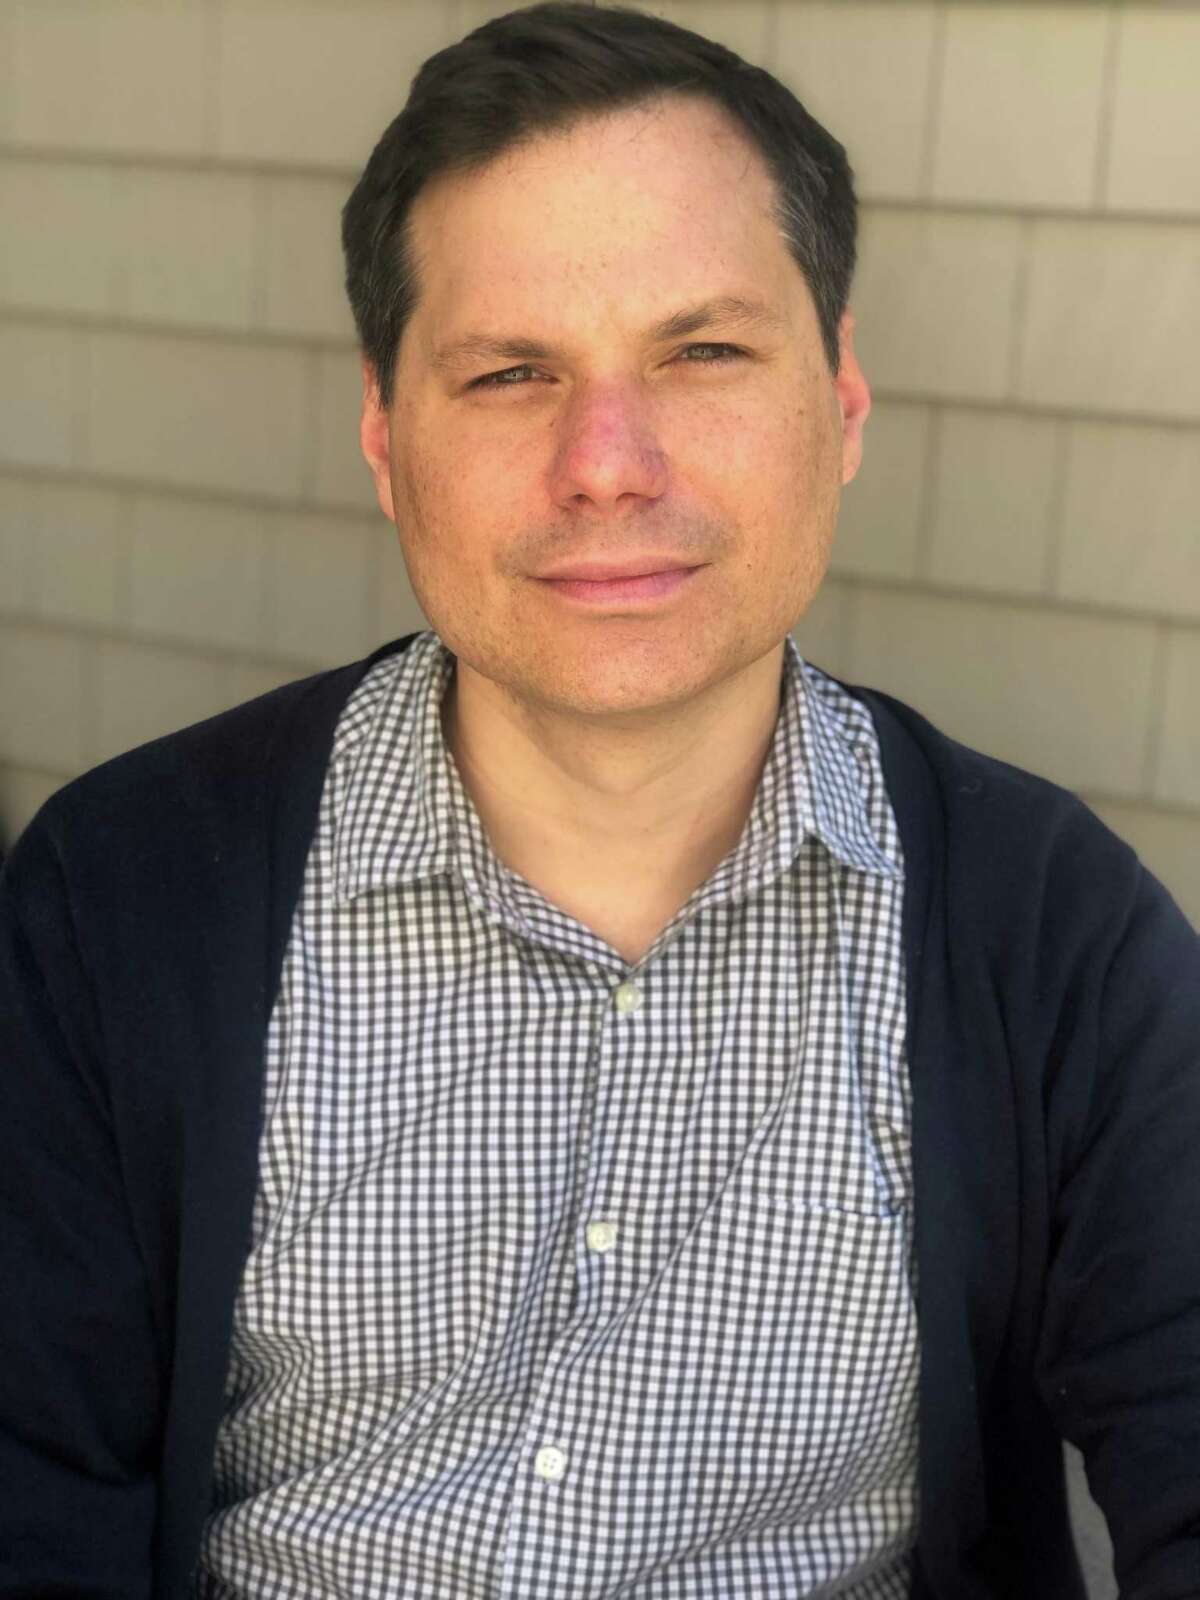 Michael Ian Black asks men to think about the importance and strength it takes to be vulnerable in his new book.